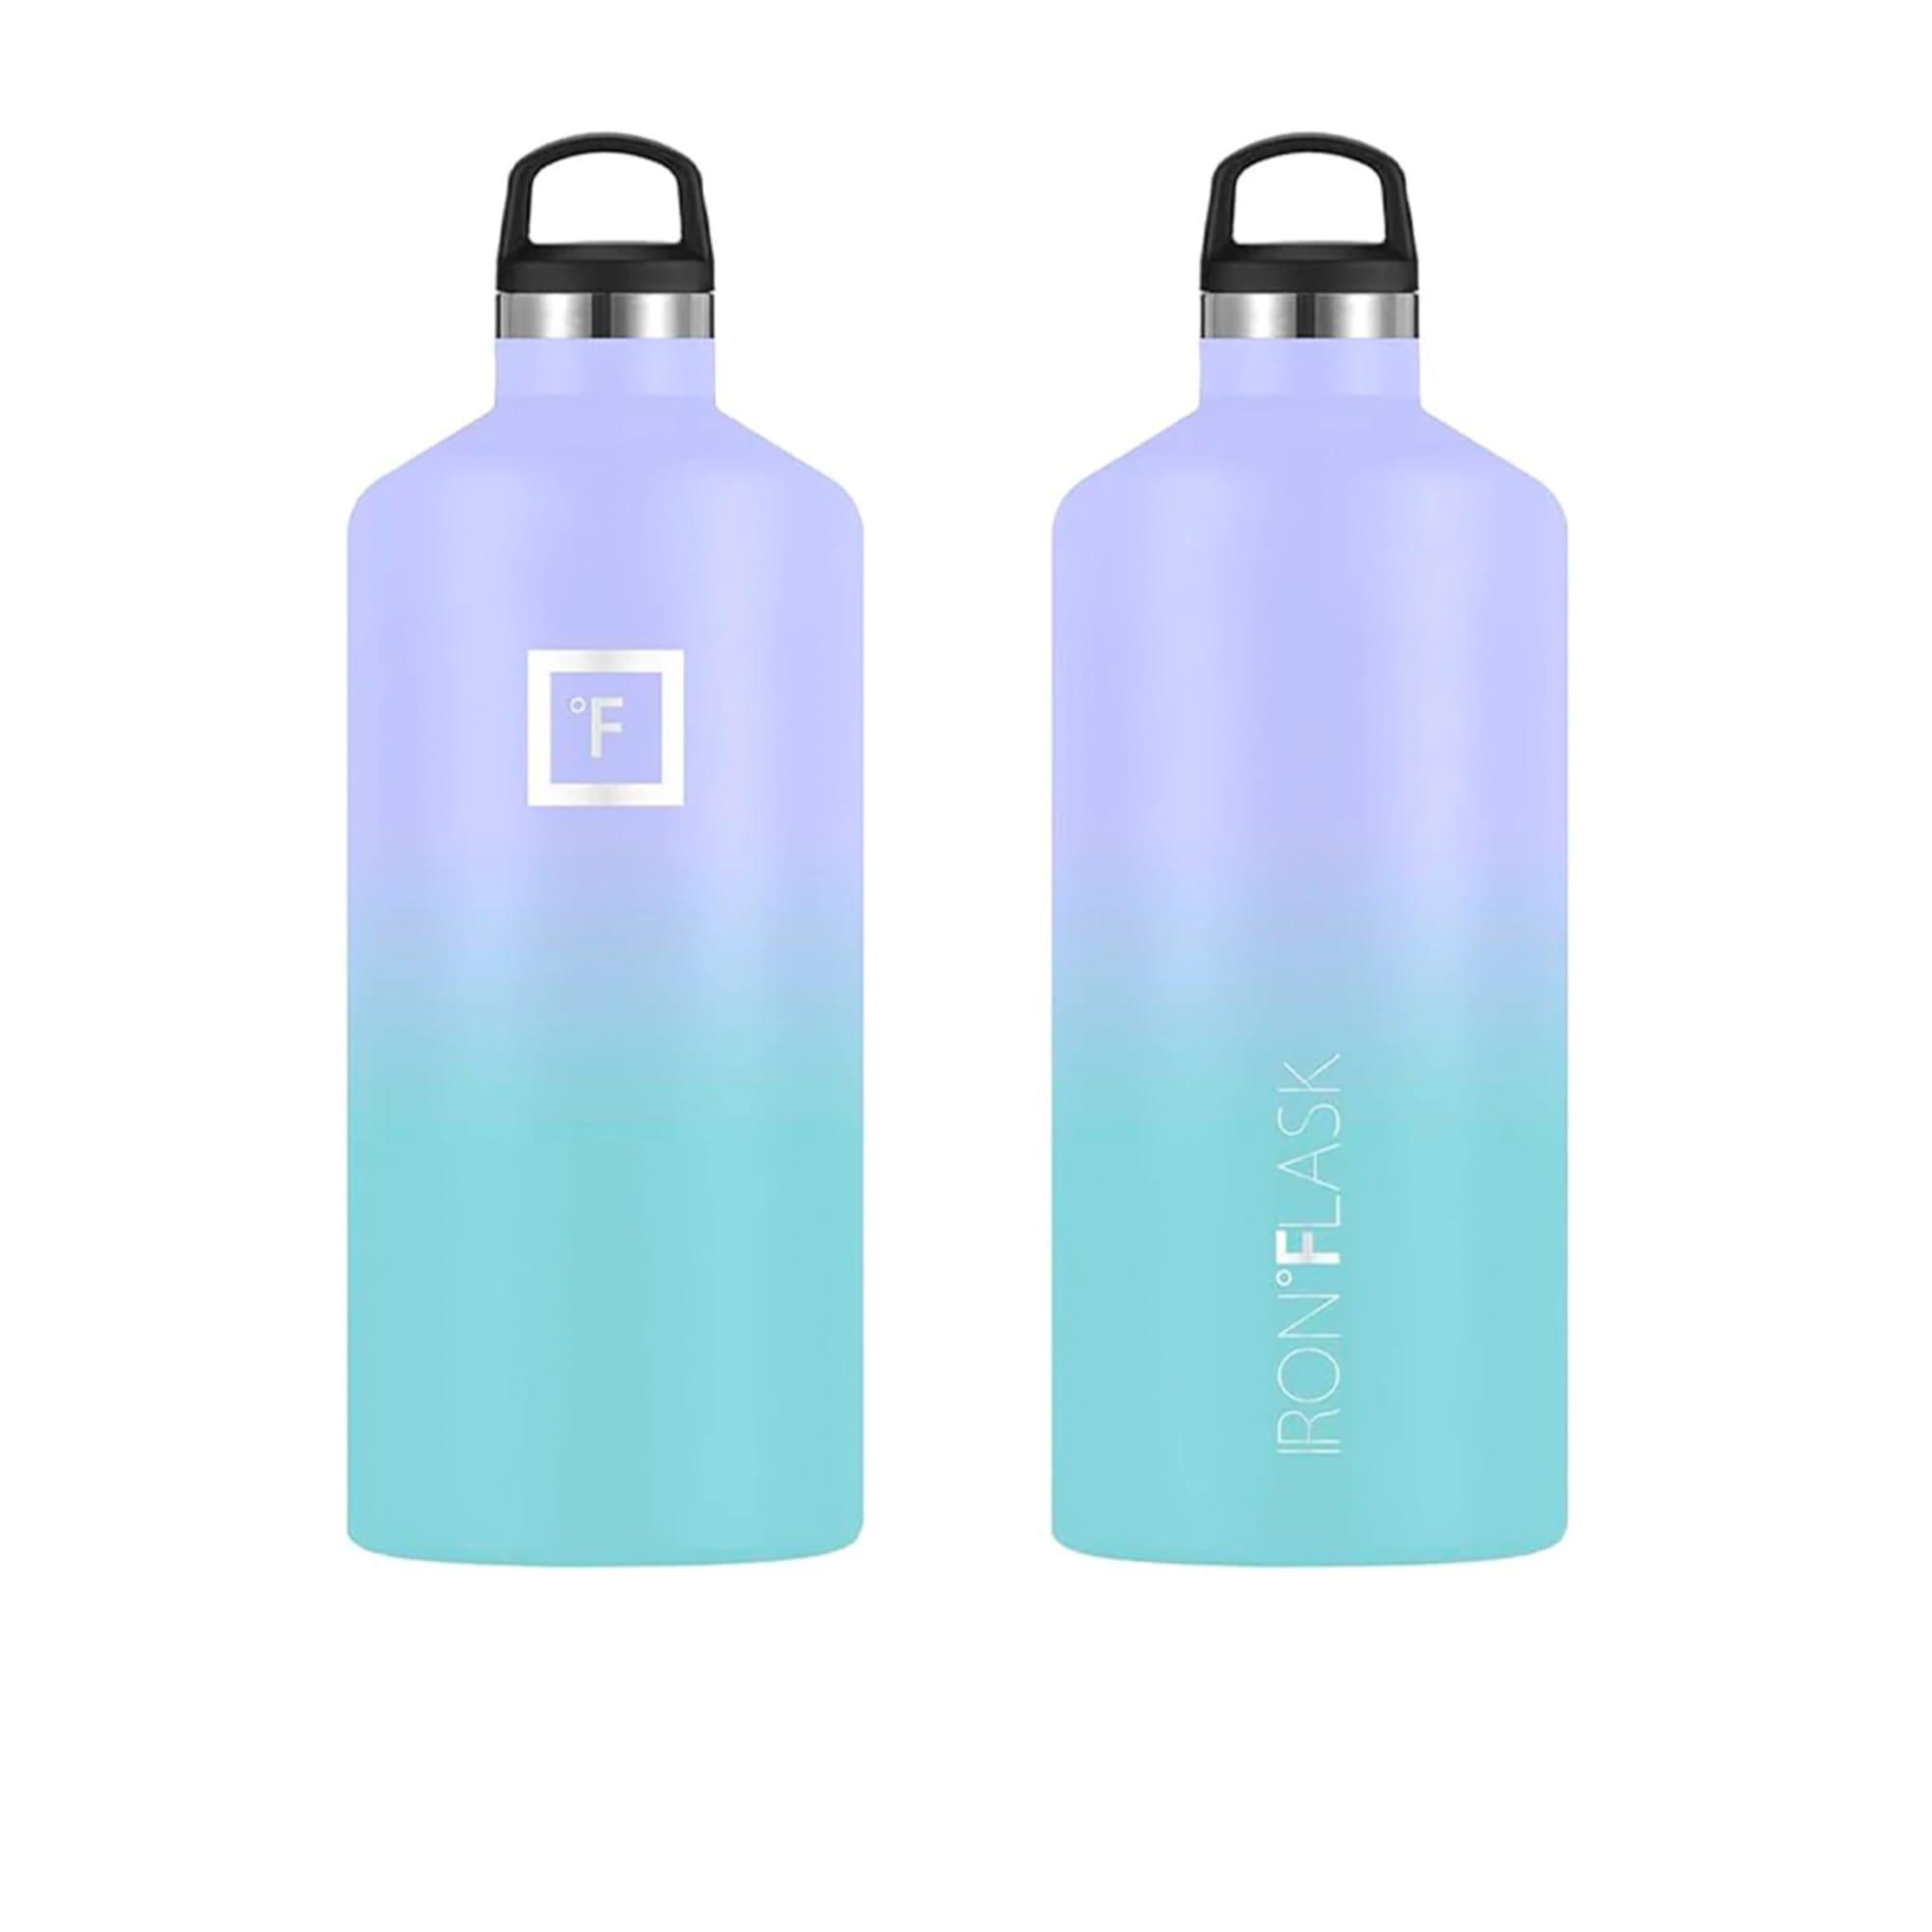 Iron Flask Narrow Mouth Bottle with Spout Lid 1.9L Cotton Candy Image 4